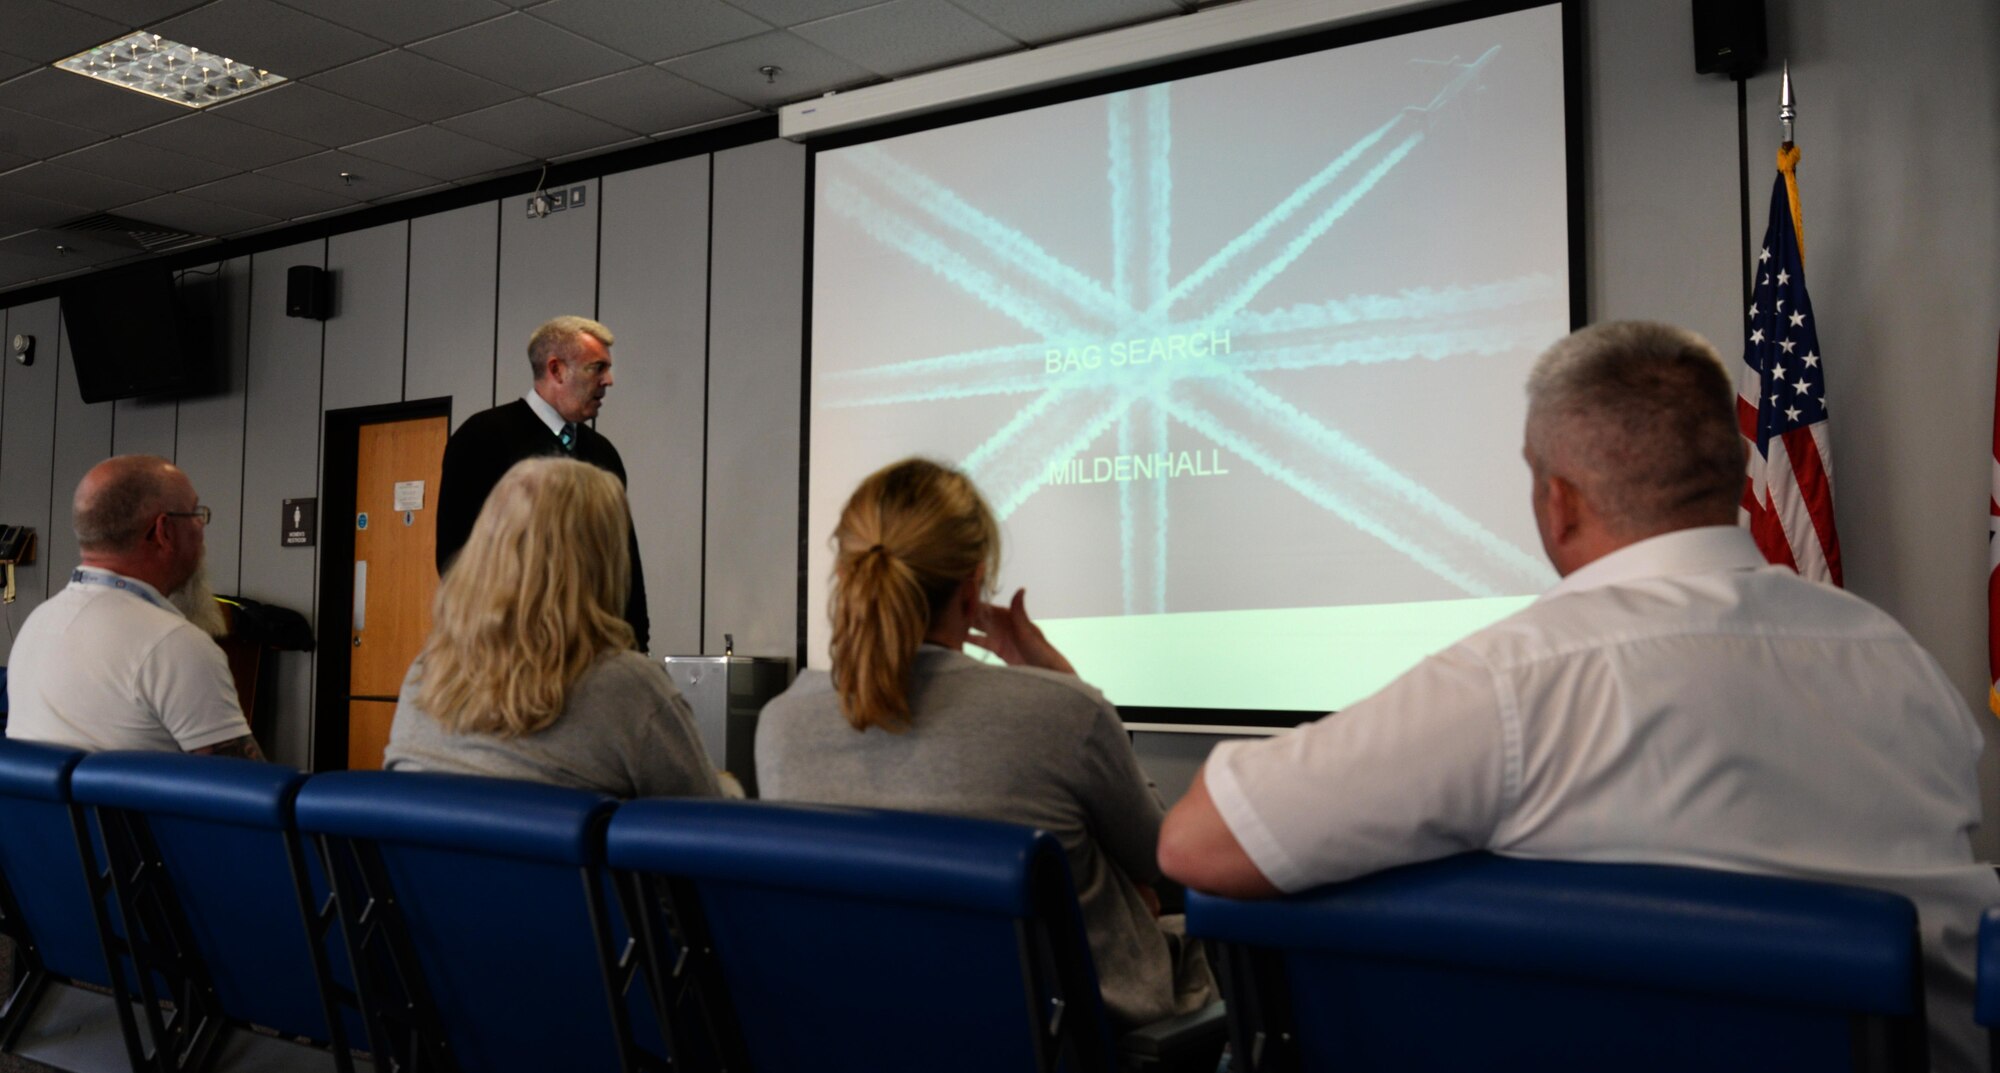 Paul Nicholls, Stansted Airport security trainer, details security check point protocol dos and don’ts May, 5, 2017, with passenger service agents assigned to the 727th Air Mobility Squadron on RAF Mildenhall, England. Passenger service agents from RAF Mildenhall organized the joint training to share knowledge and experience. Training spanned three days and was held at Stansted and RAF Mildenhall. (U.S. Air Force photo by Senior Airman Justine Rho)